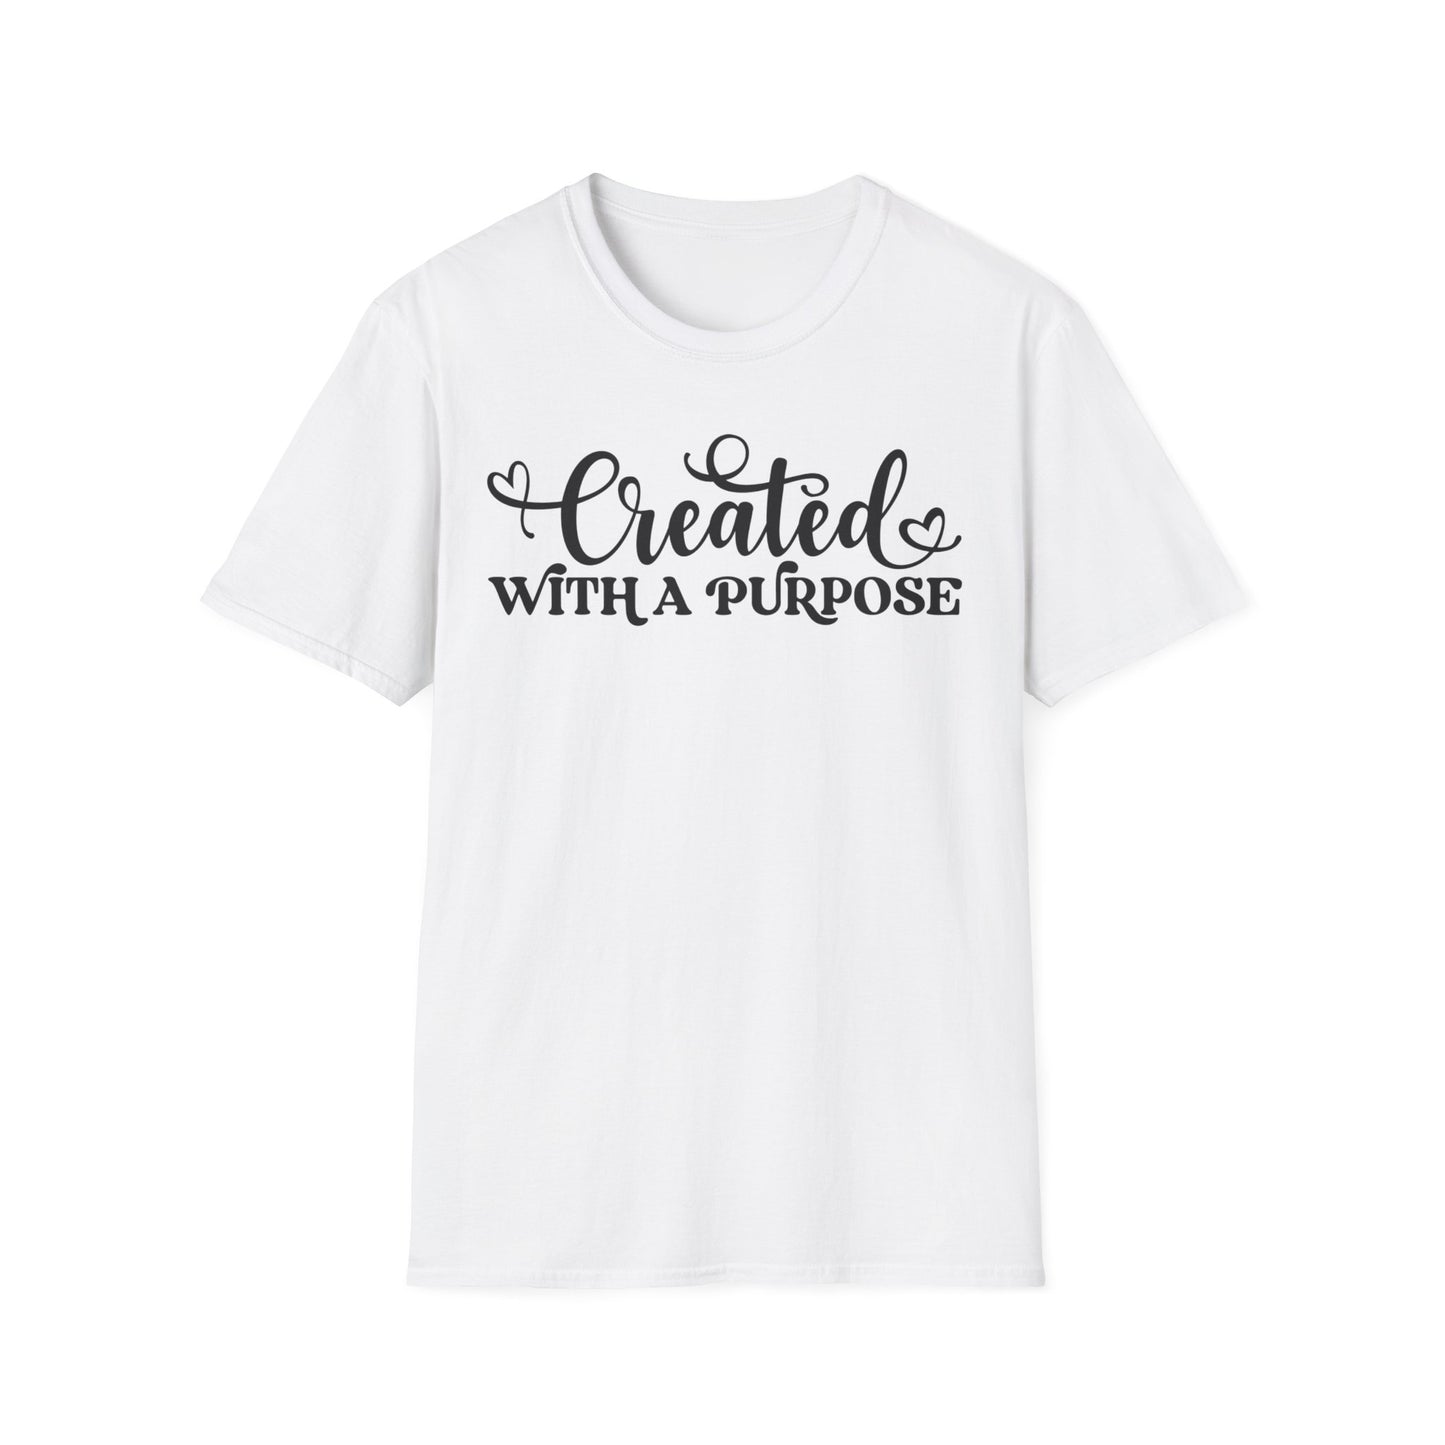 Created with a Purpose Unisex Softstyle T-Shirt | T-Shirt | Cotton, Crew neck, DTG, Men's Clothing, Neck Labels, Regular fit, Summer Picks, T-shirts, TikTok, Women's Clothing | Printify